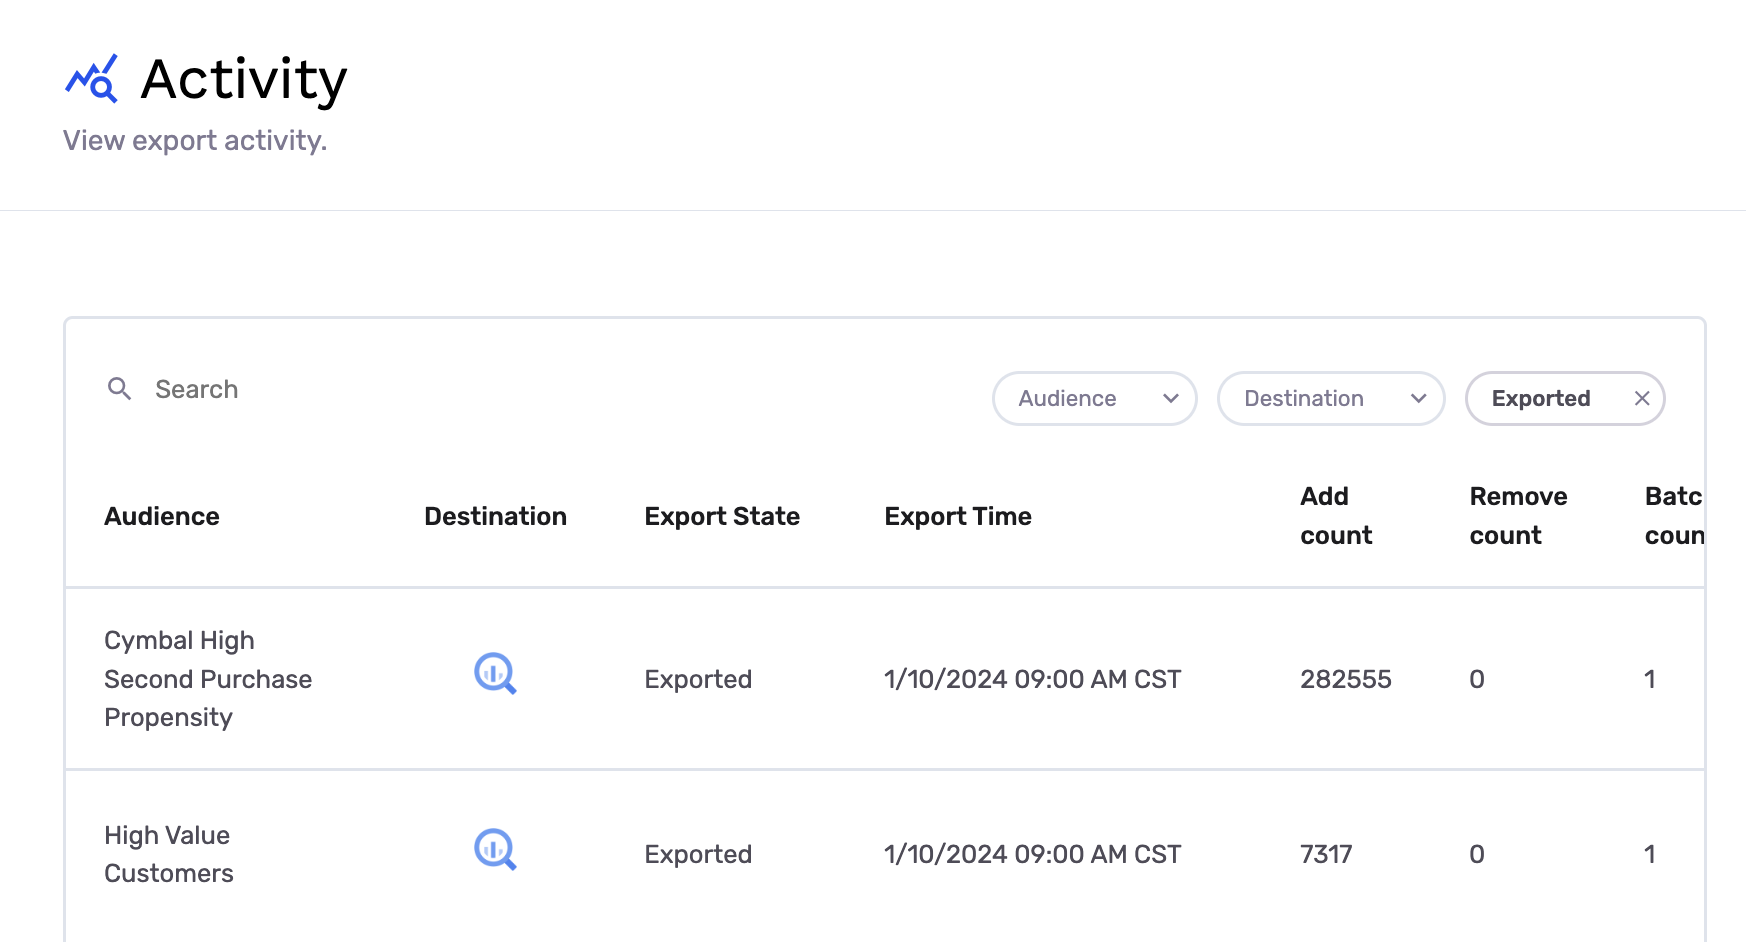 activity log by export state